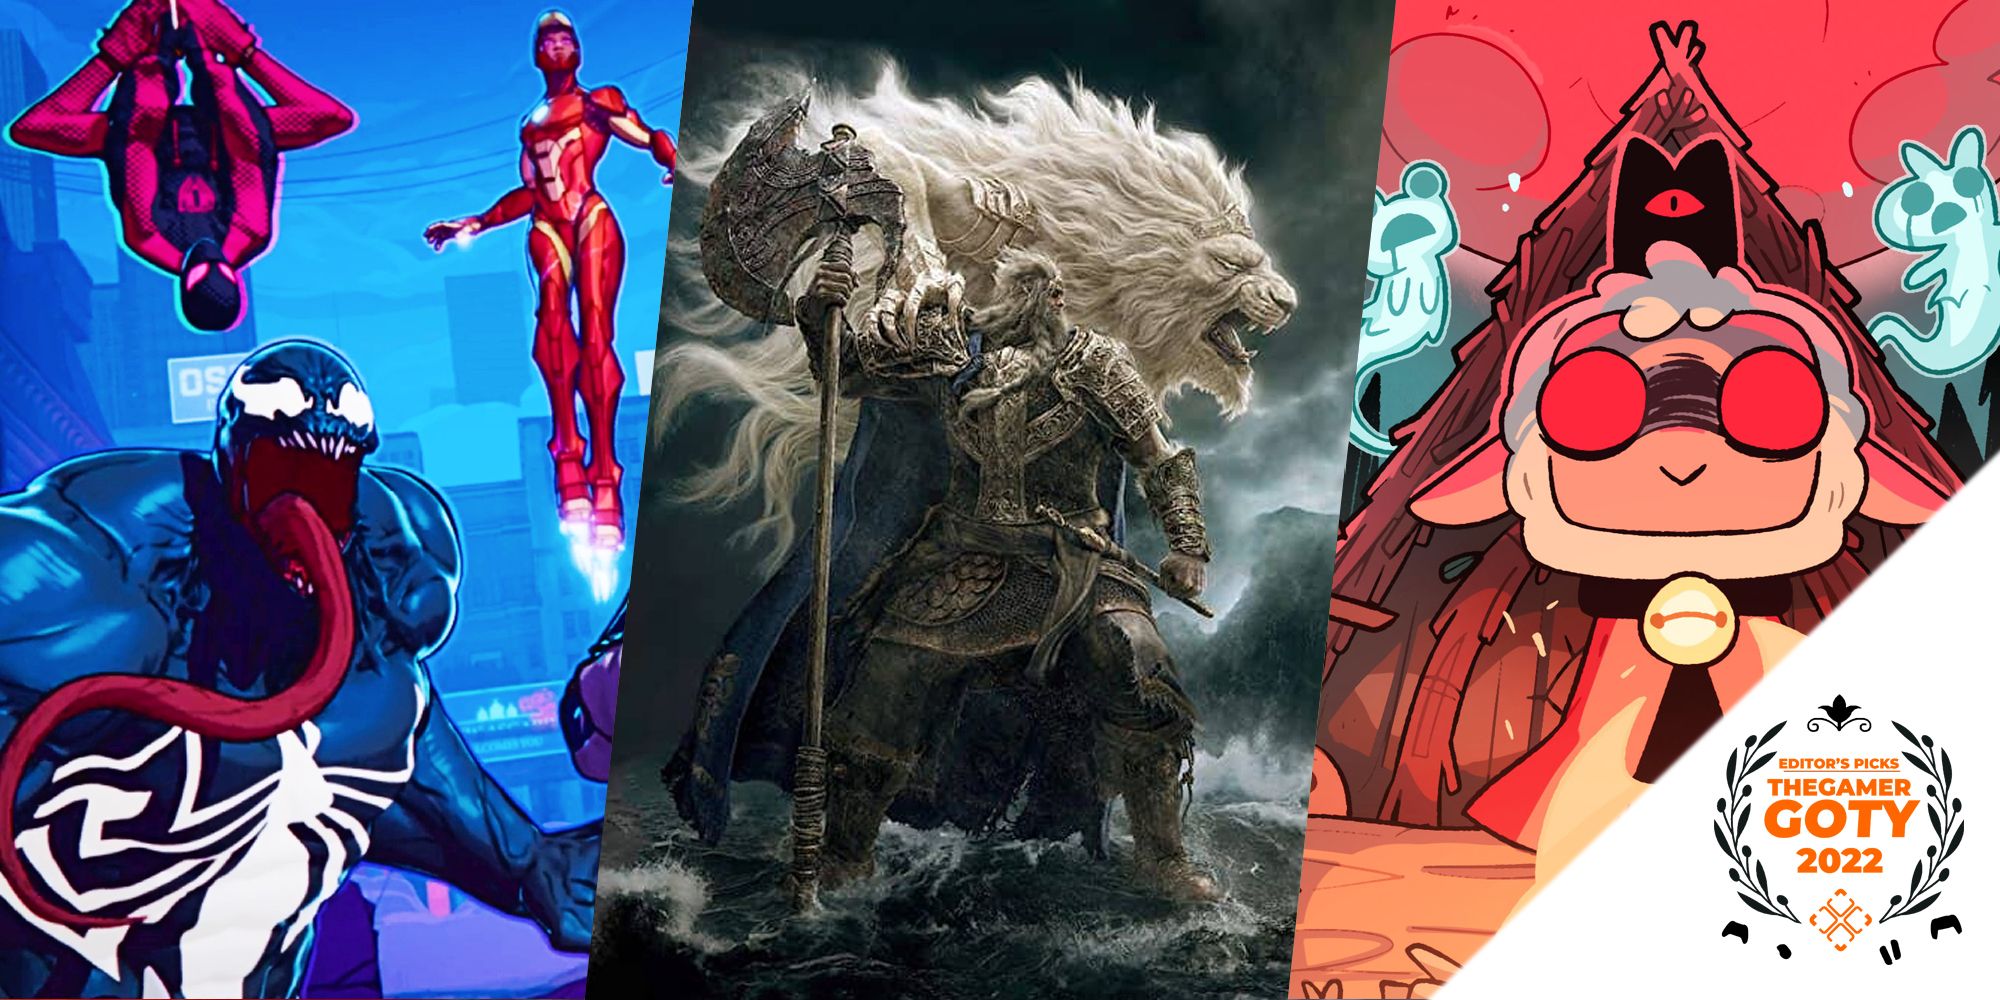 TheGamer GOTY header with marvel snap, elden ring, and cult of the lamb